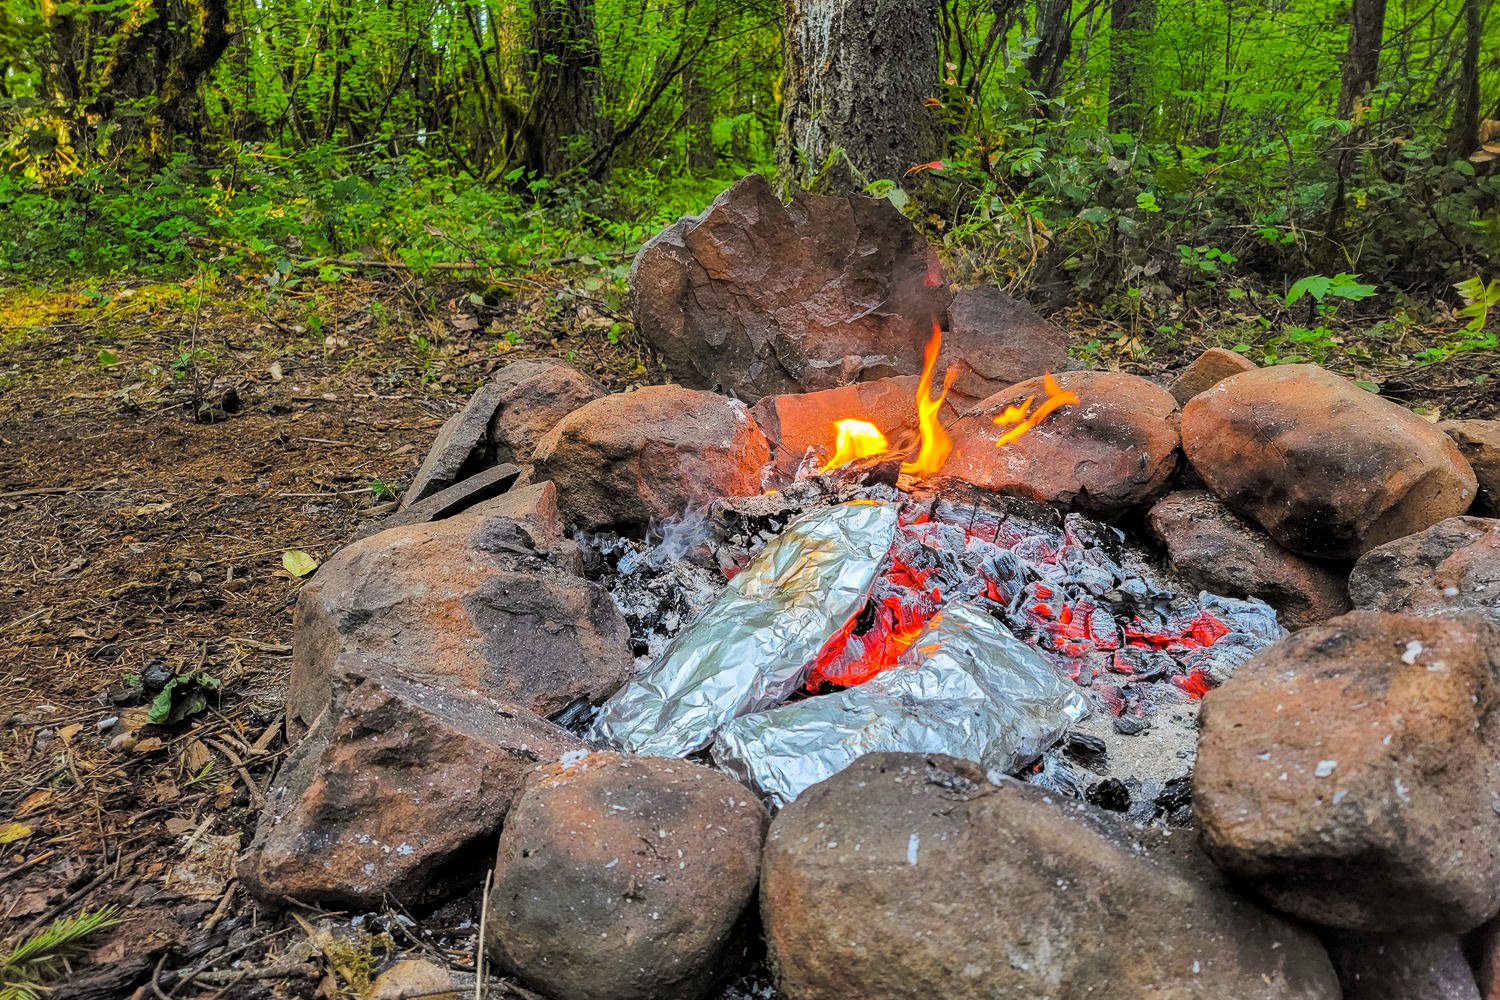 Foil packet meals cooking over a bed of embers on the edge of a campfire